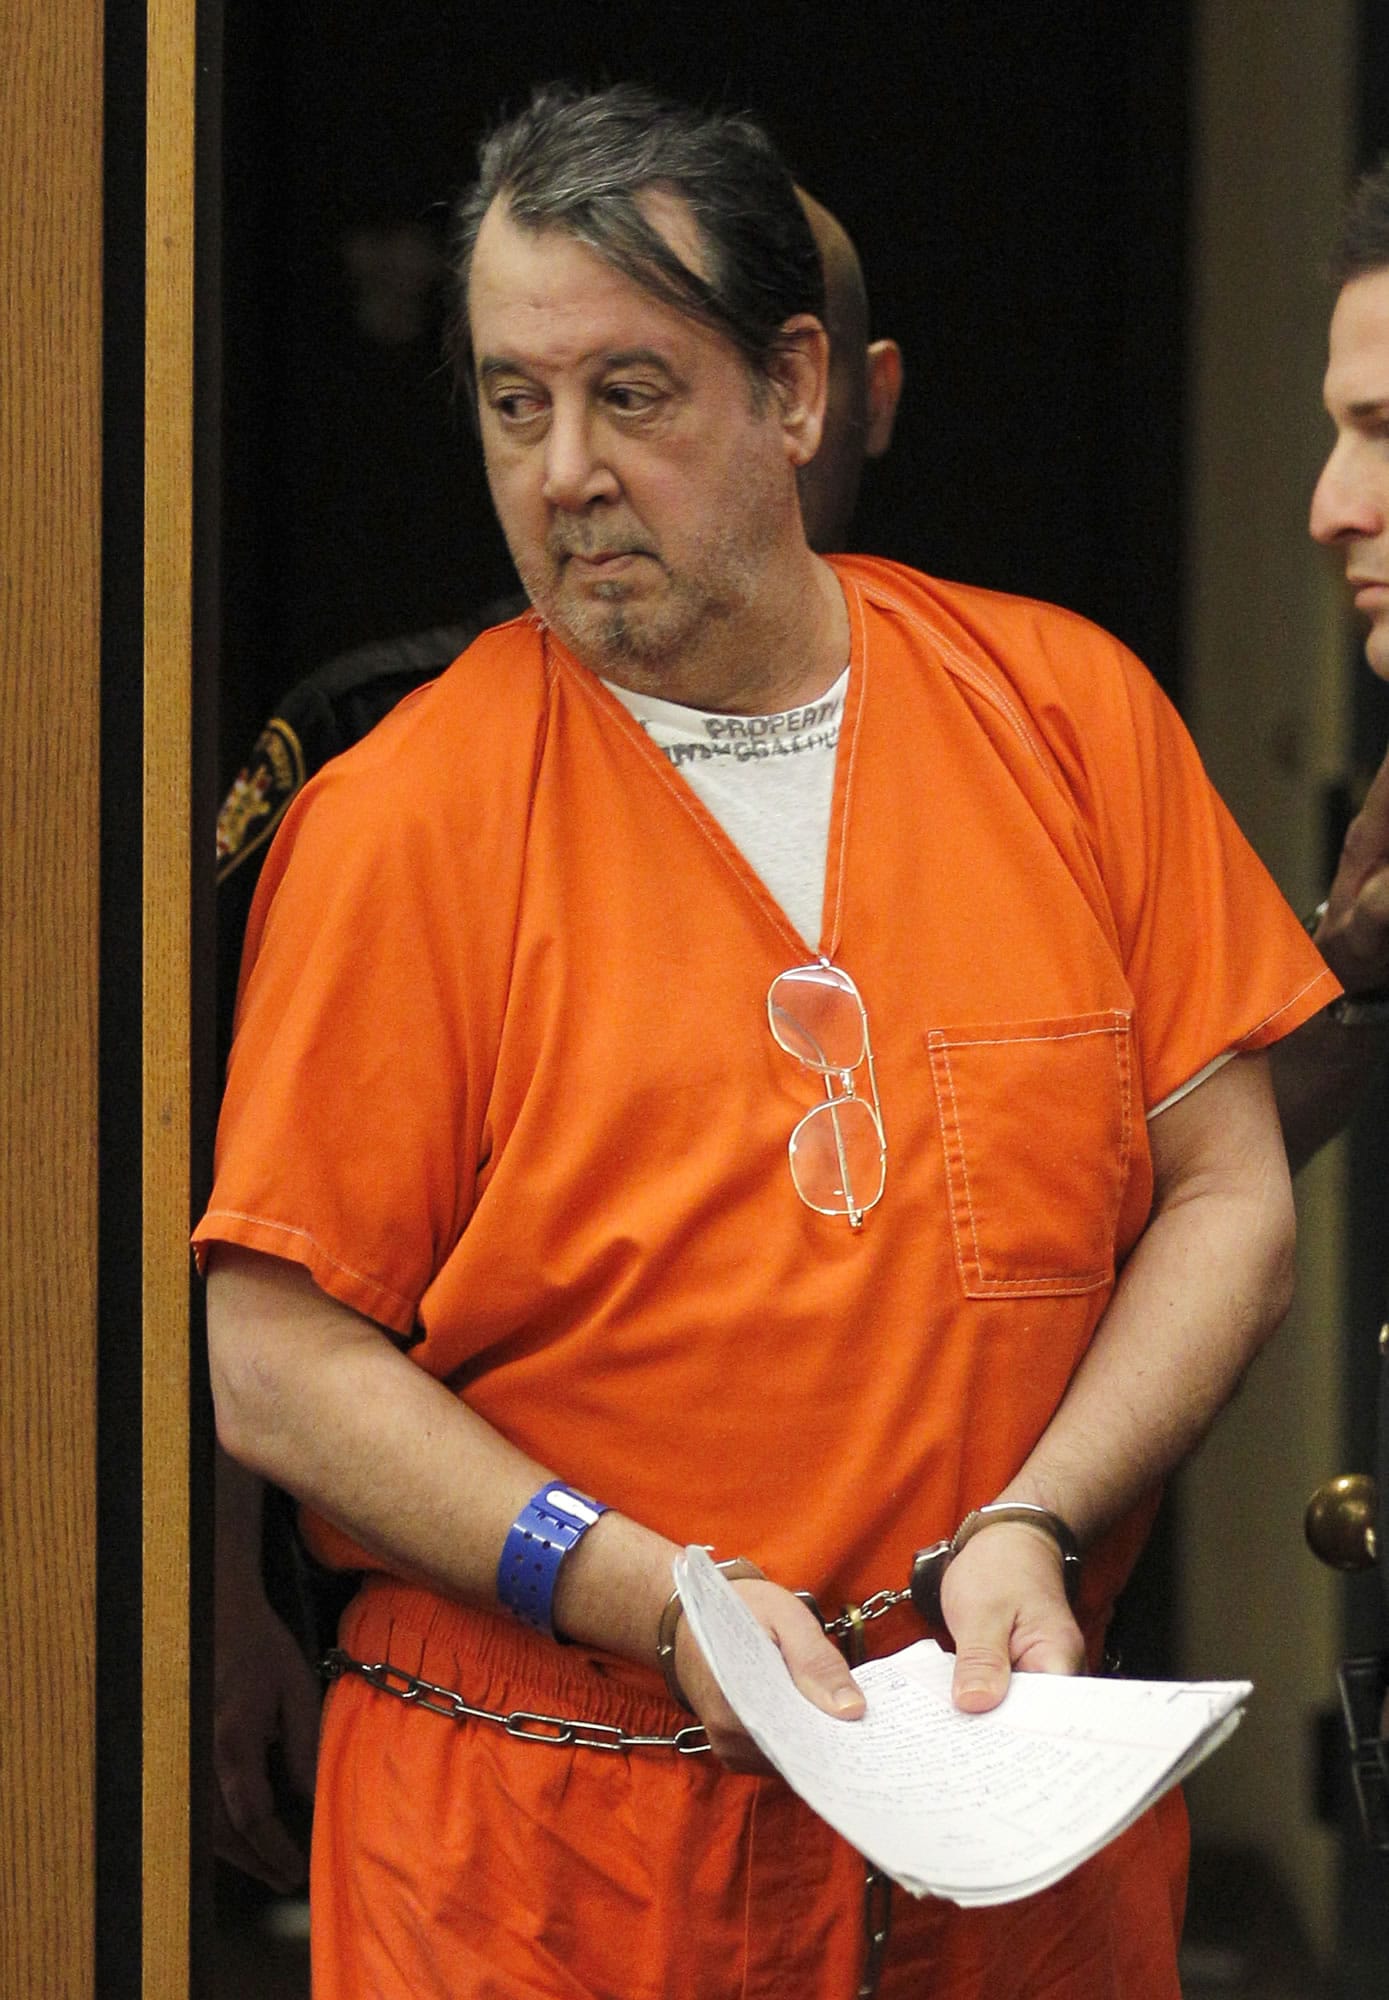 Bobby Thompson appears at a hearing in Cuyahoga County Court in Cleveland.